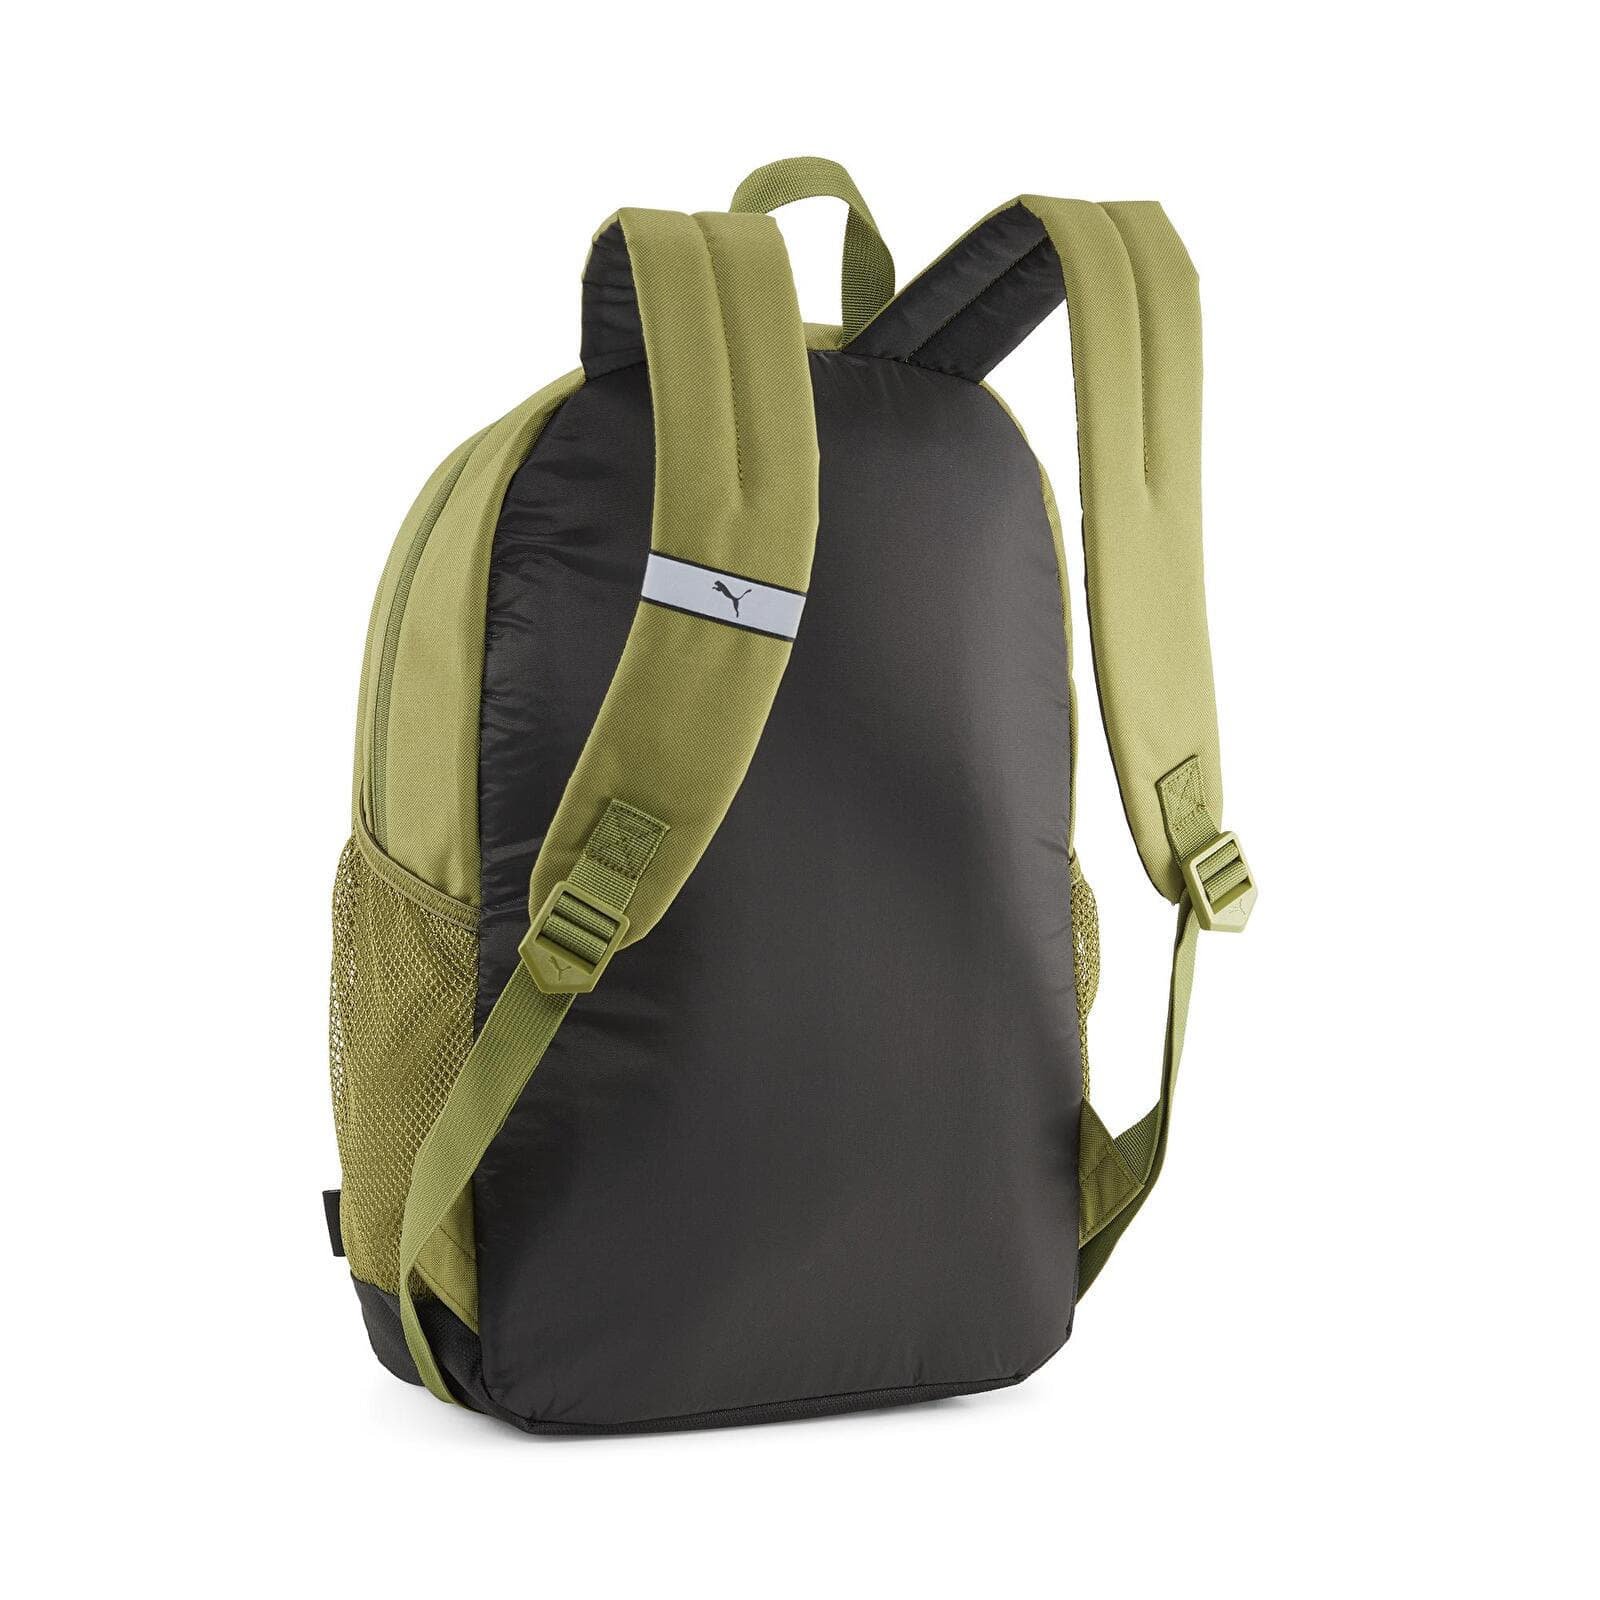 Backpack Buzz Backpack Green, Universal